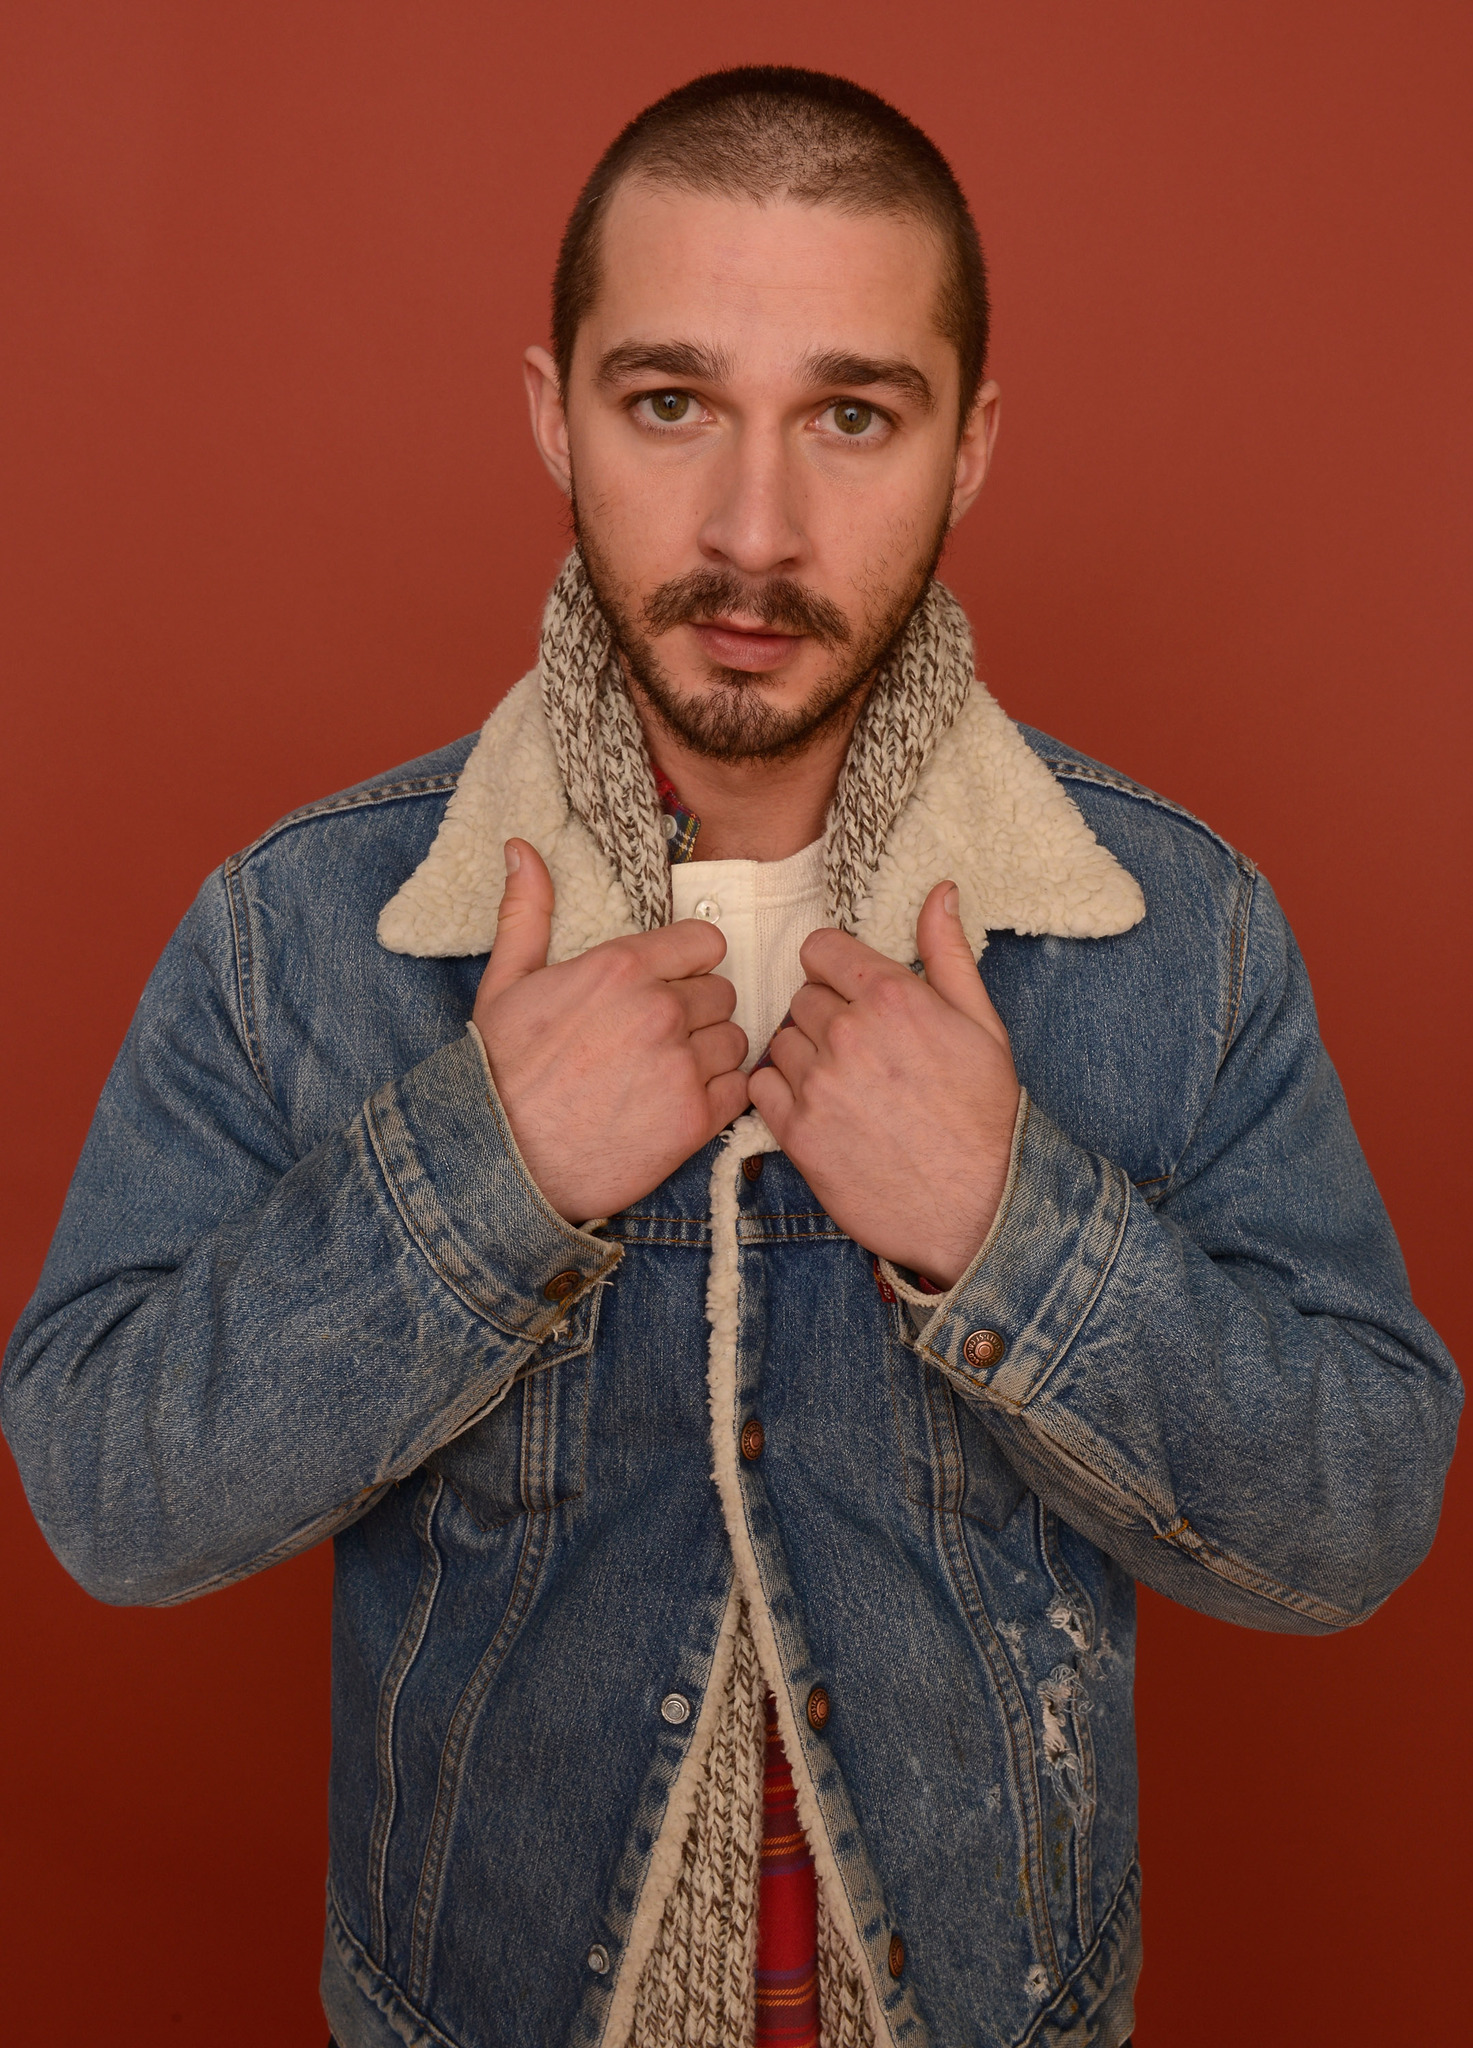 Shia LaBeouf at event of The Necessary Death of Charlie Countryman (2013)